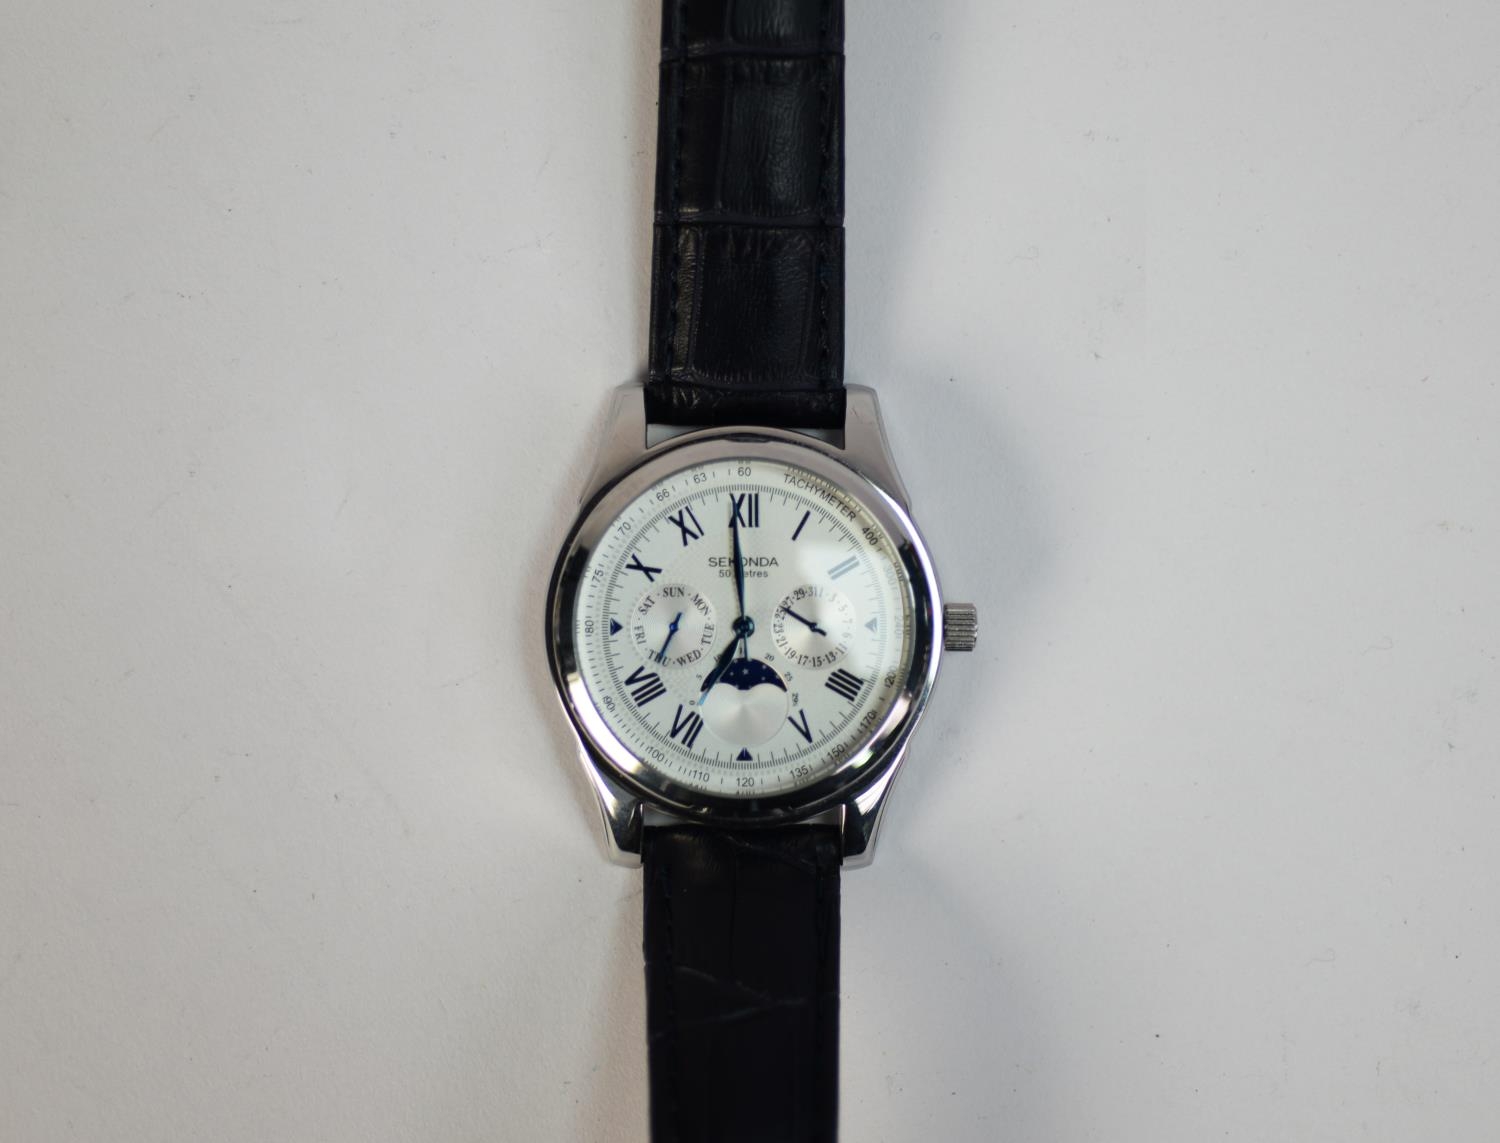 GENT'S MIRTELLO WRISTWATCH with mechanical movement, the works visible through the glass back and - Image 2 of 7